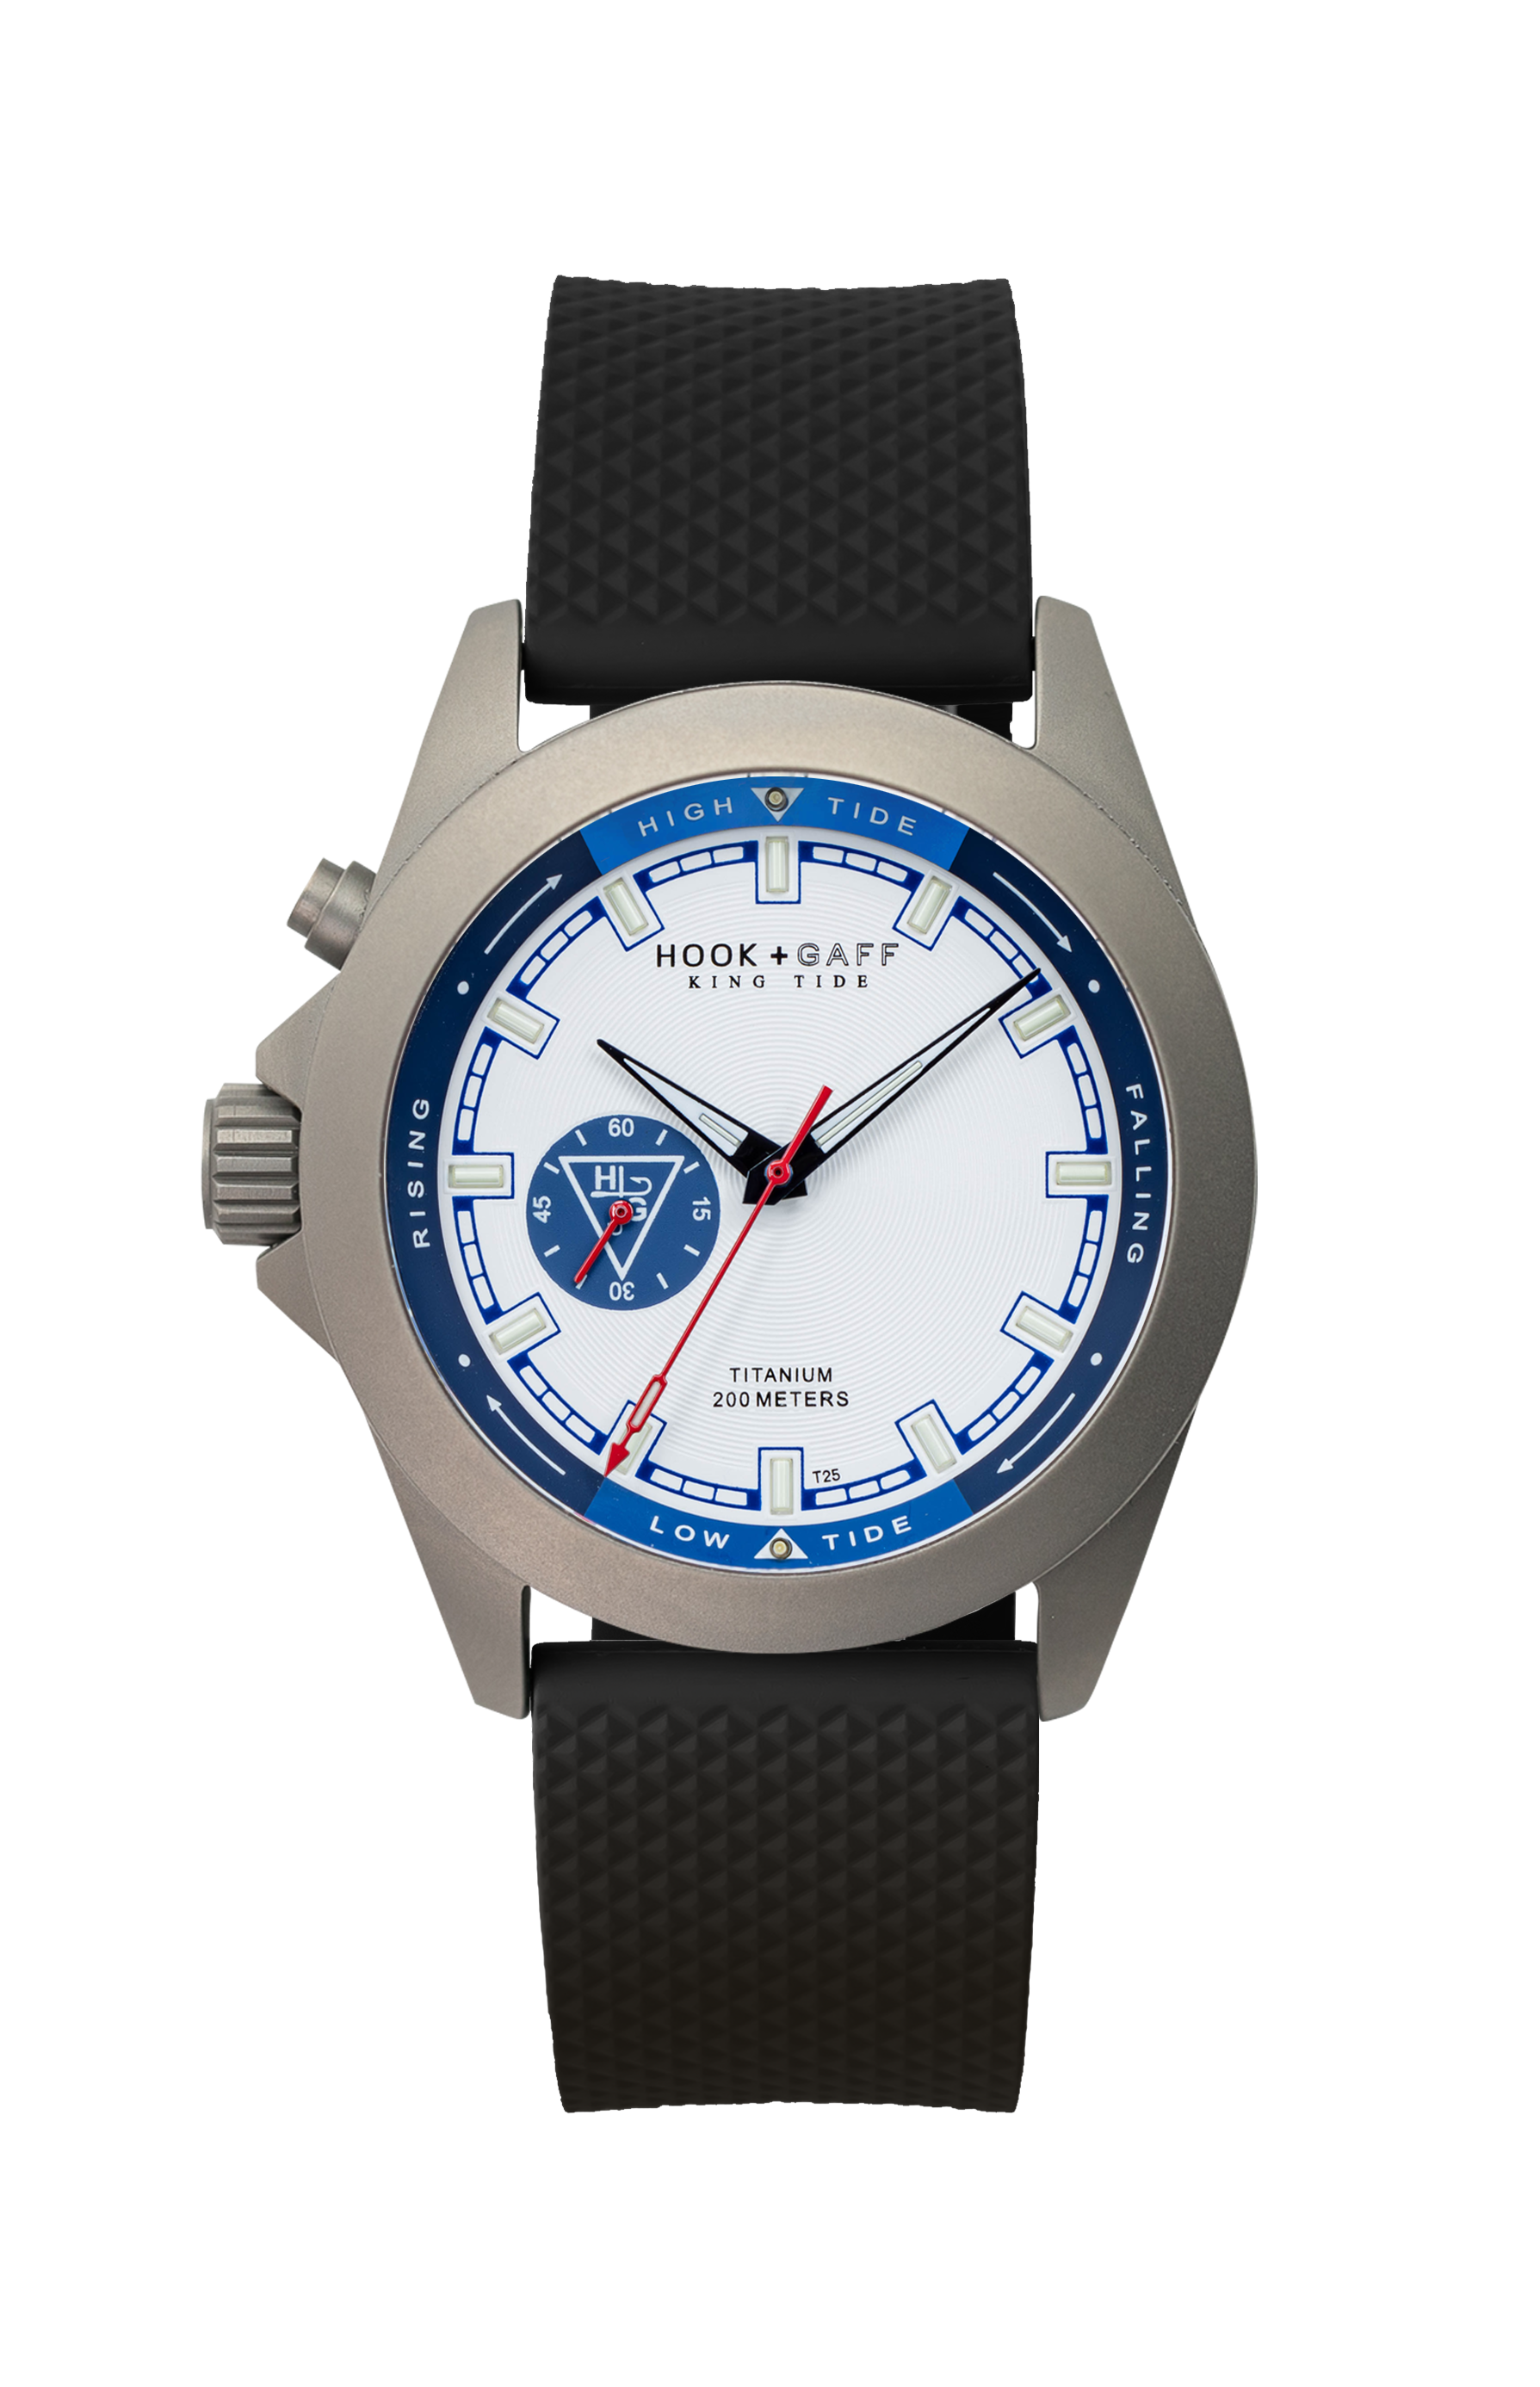 New! King Tide Watch - White and Blue Dial